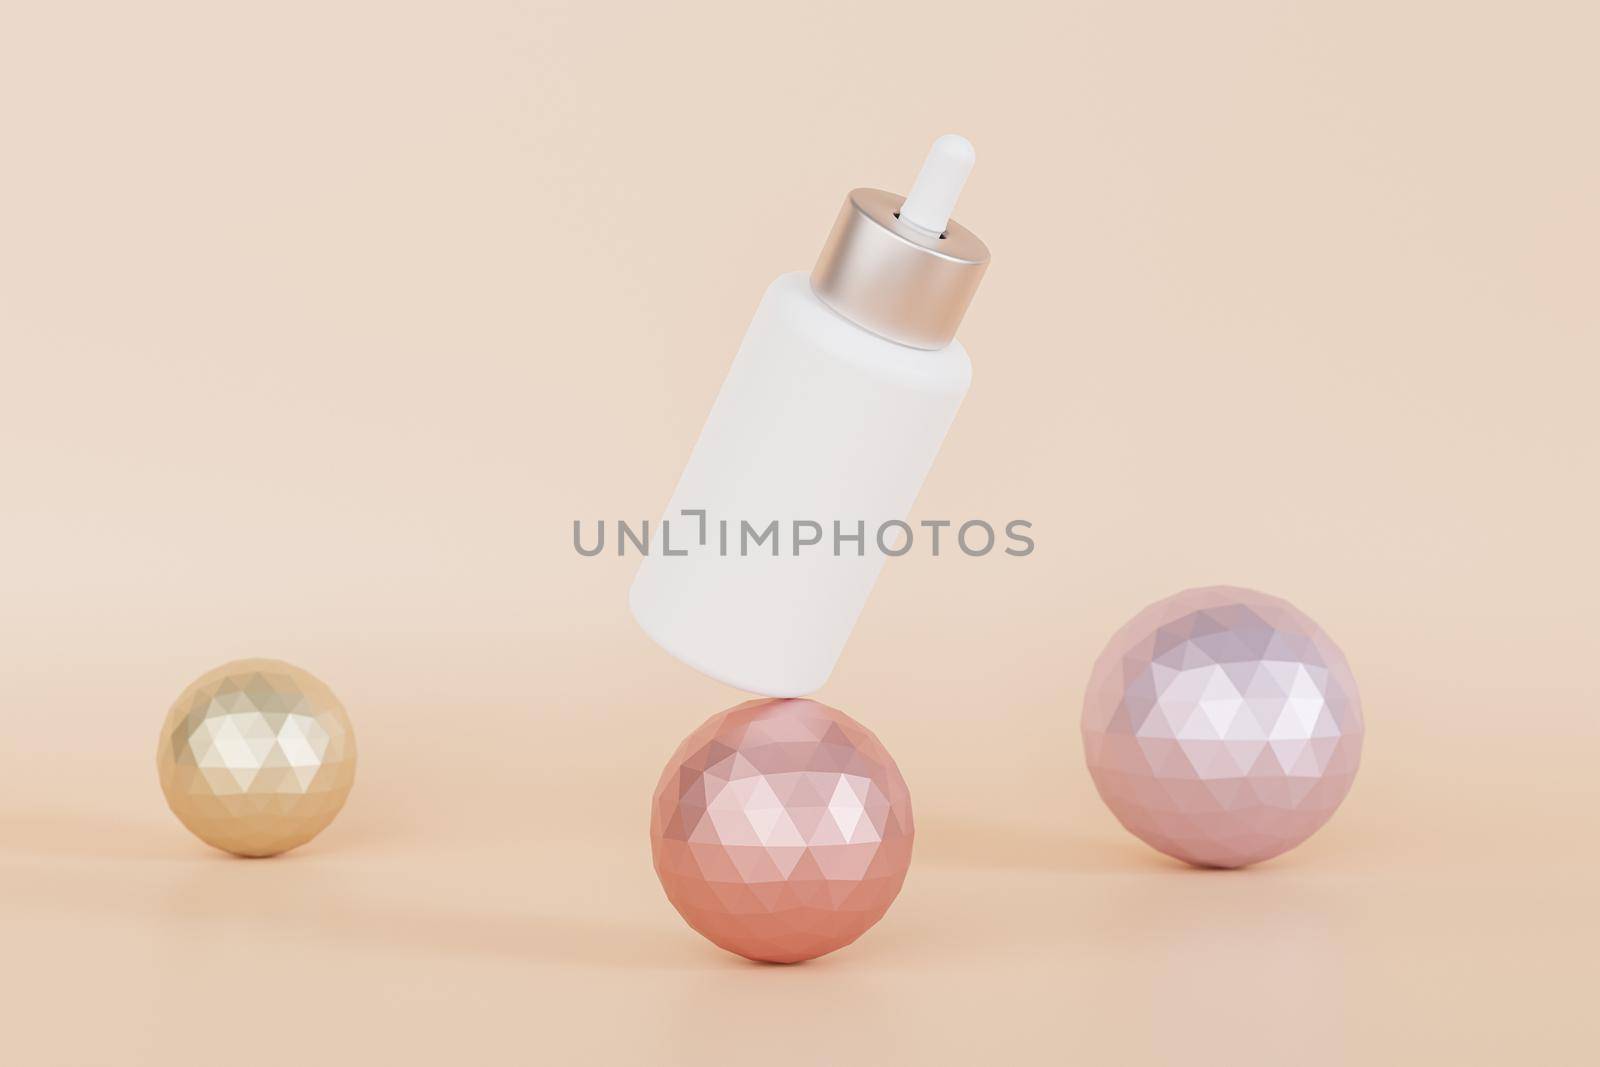 Mockup dropper bottle for cosmetics products or advertising balancing on metallic spheres, 3d illustration render by Frostroomhead